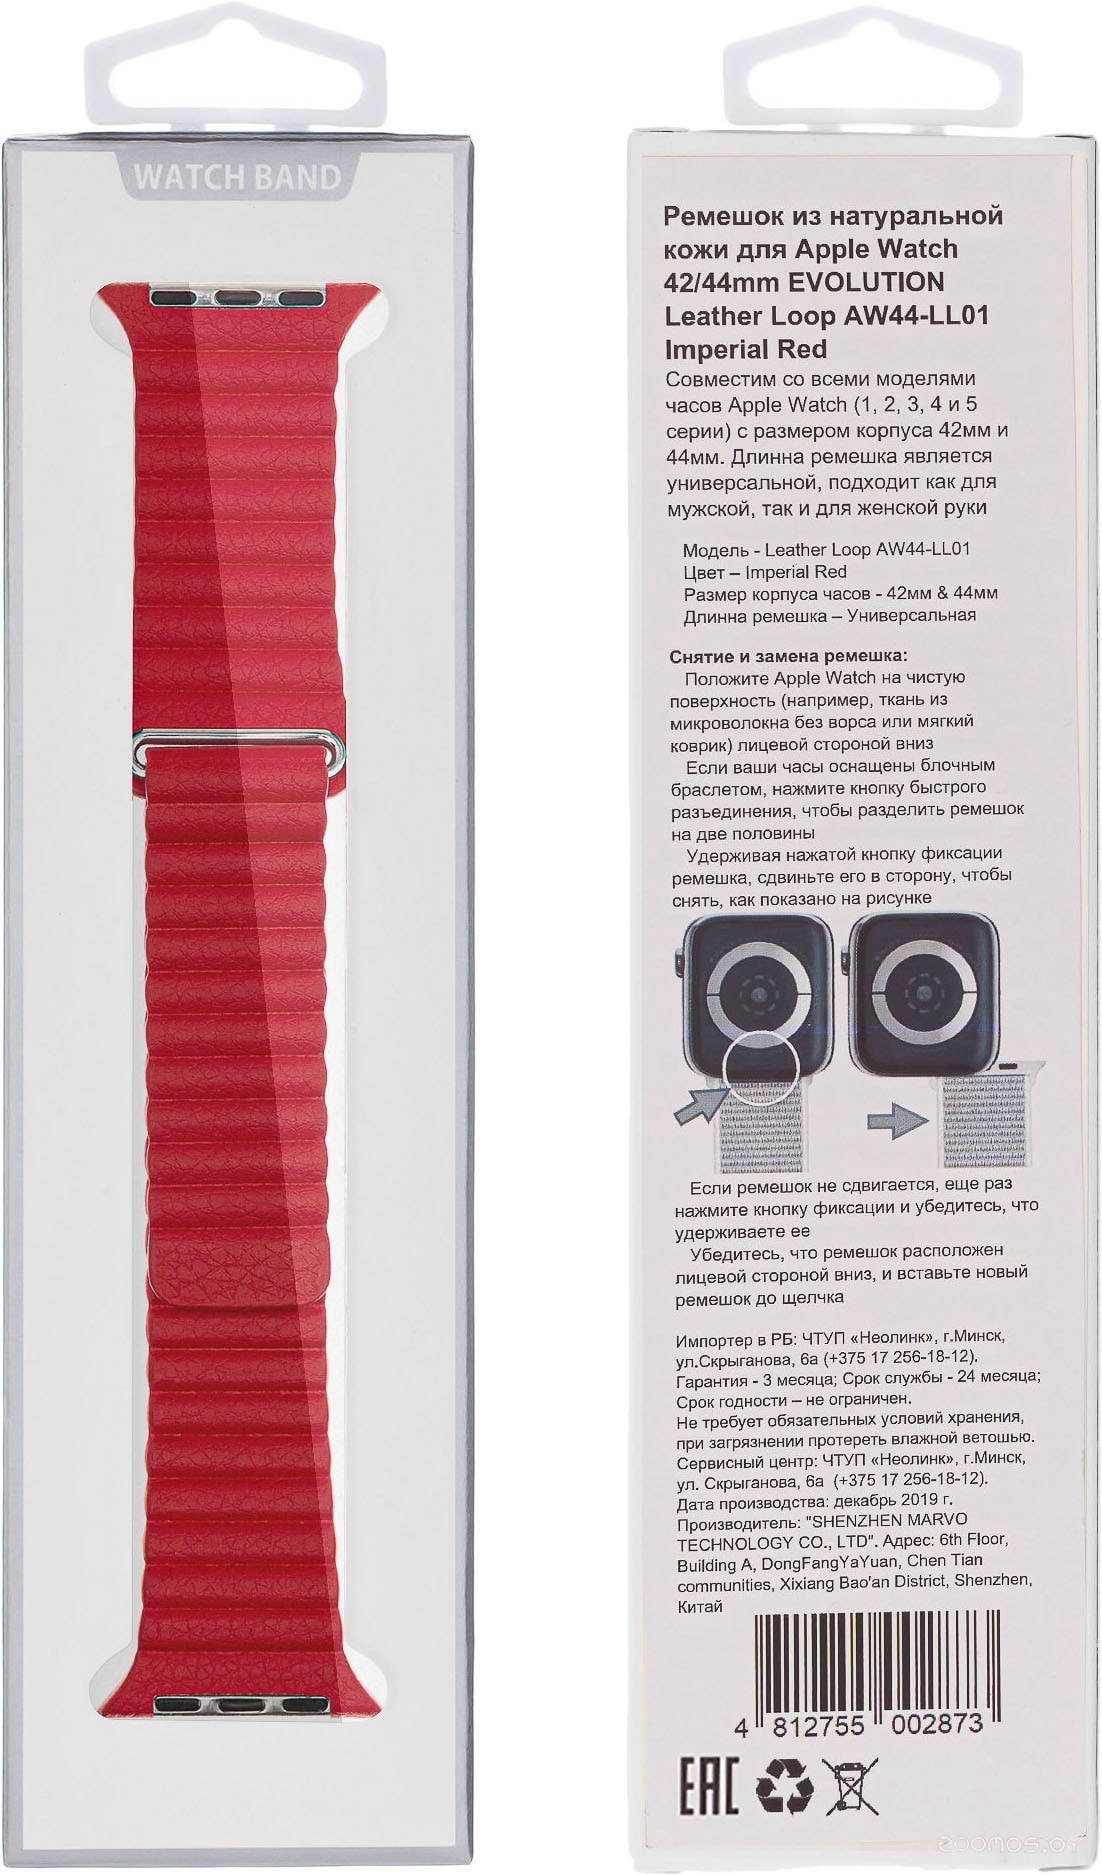  Evolution AW44-LL01  Apple Watch 42/44  (imperial red)     